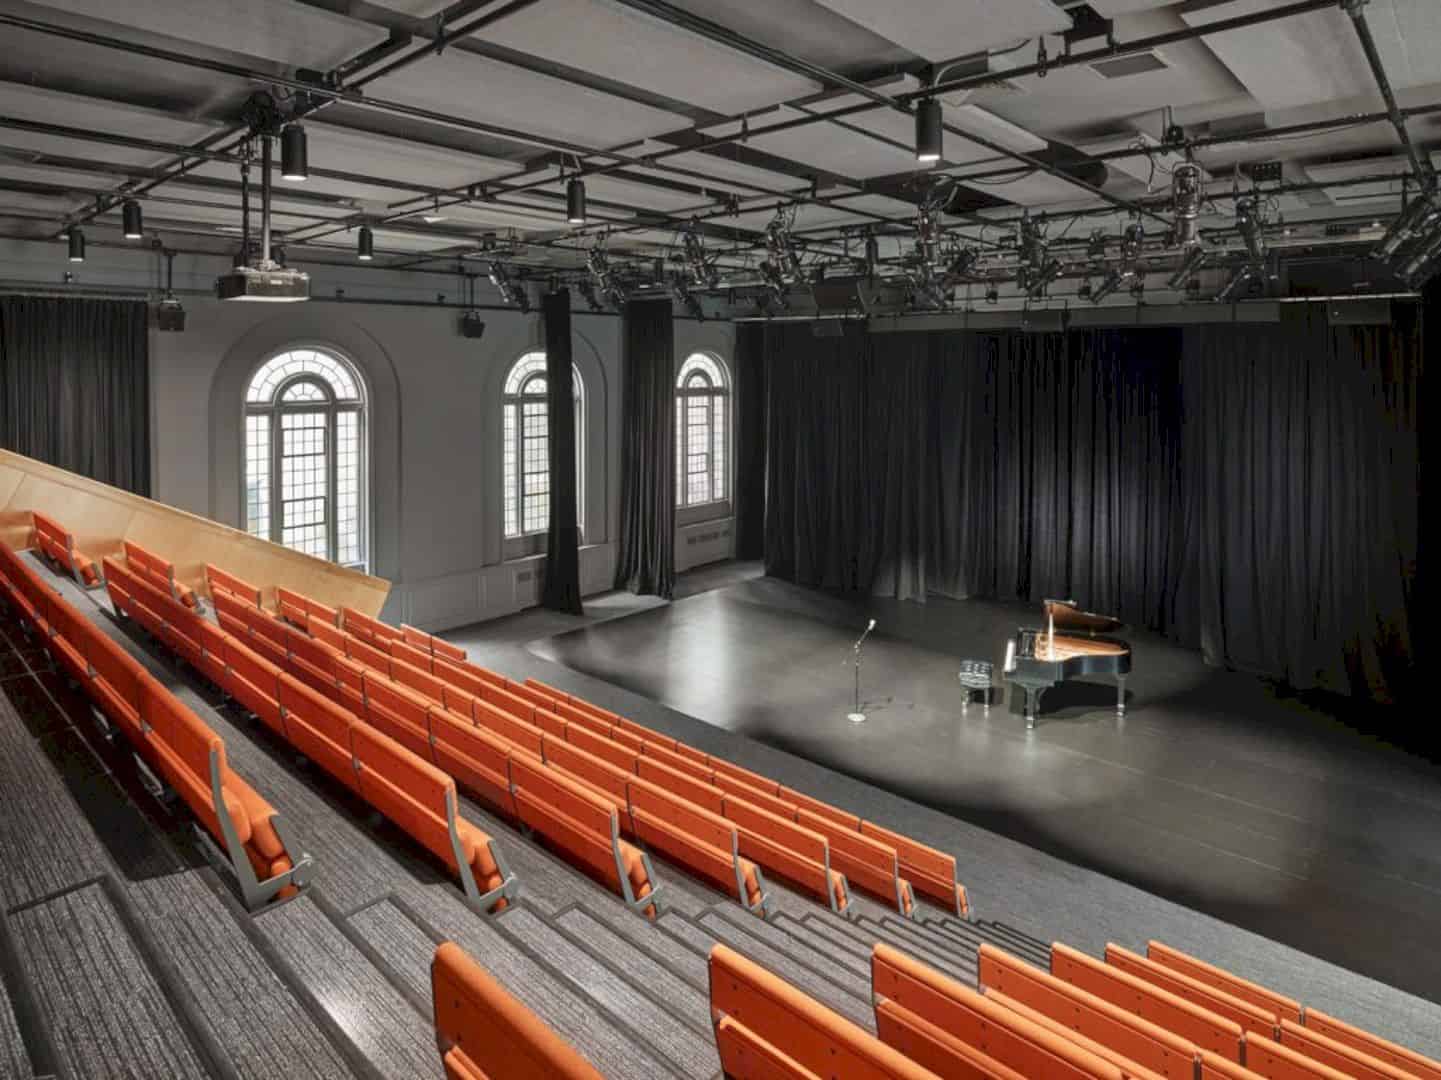 The Project Of Barkeley Carroll School Performing Arts Center By 1100 Architect 1